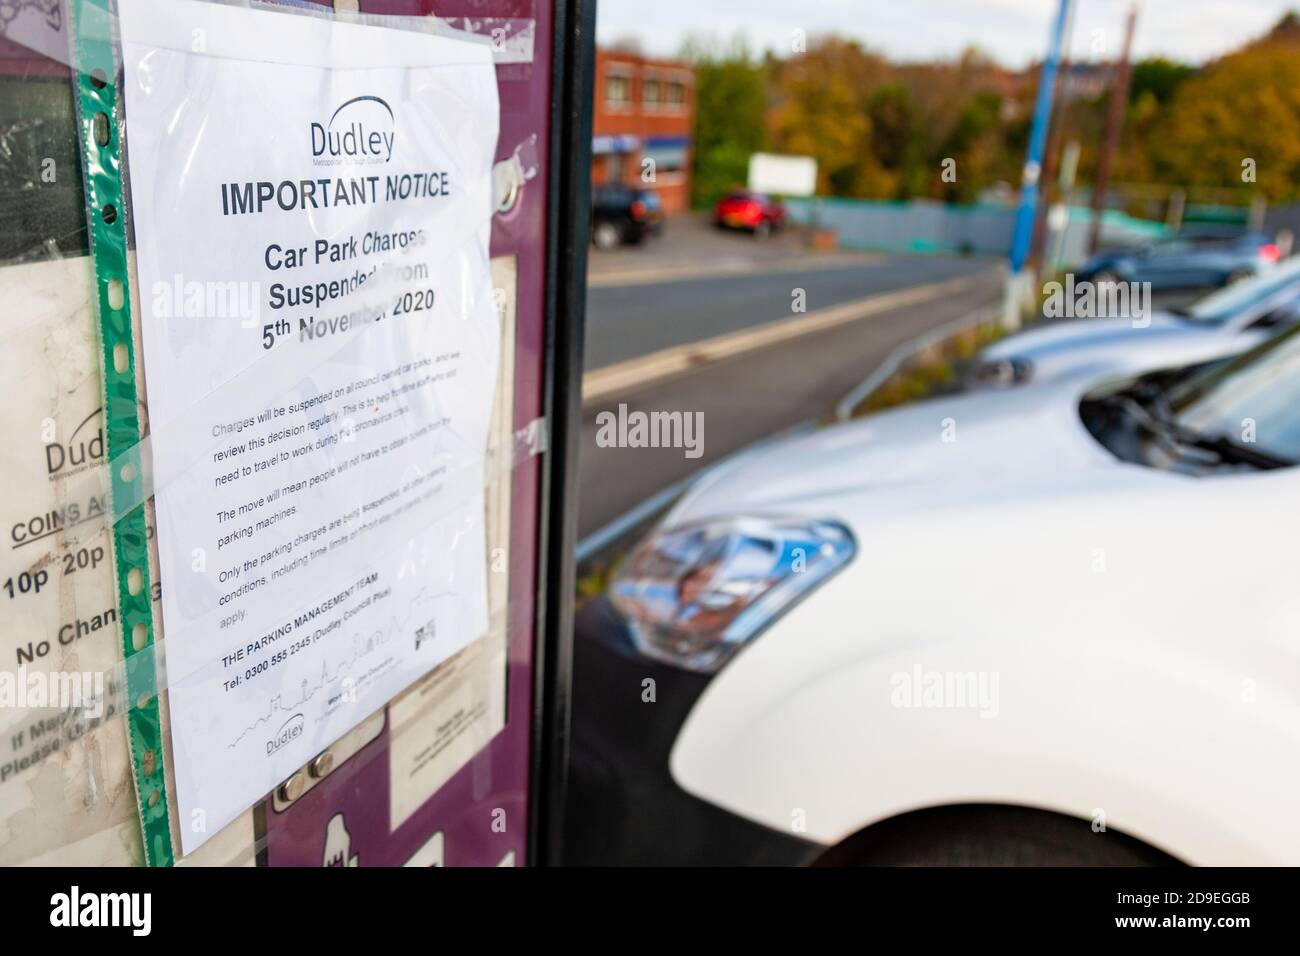 Halesowen, West Midlands, UK. 5th Nov, 2020. Car parking charges are suspended in Halesowen, West Midlands, on the first day of the current lockdown measures. Credit: Peter Lopeman/Alamy Live News Stock Photo